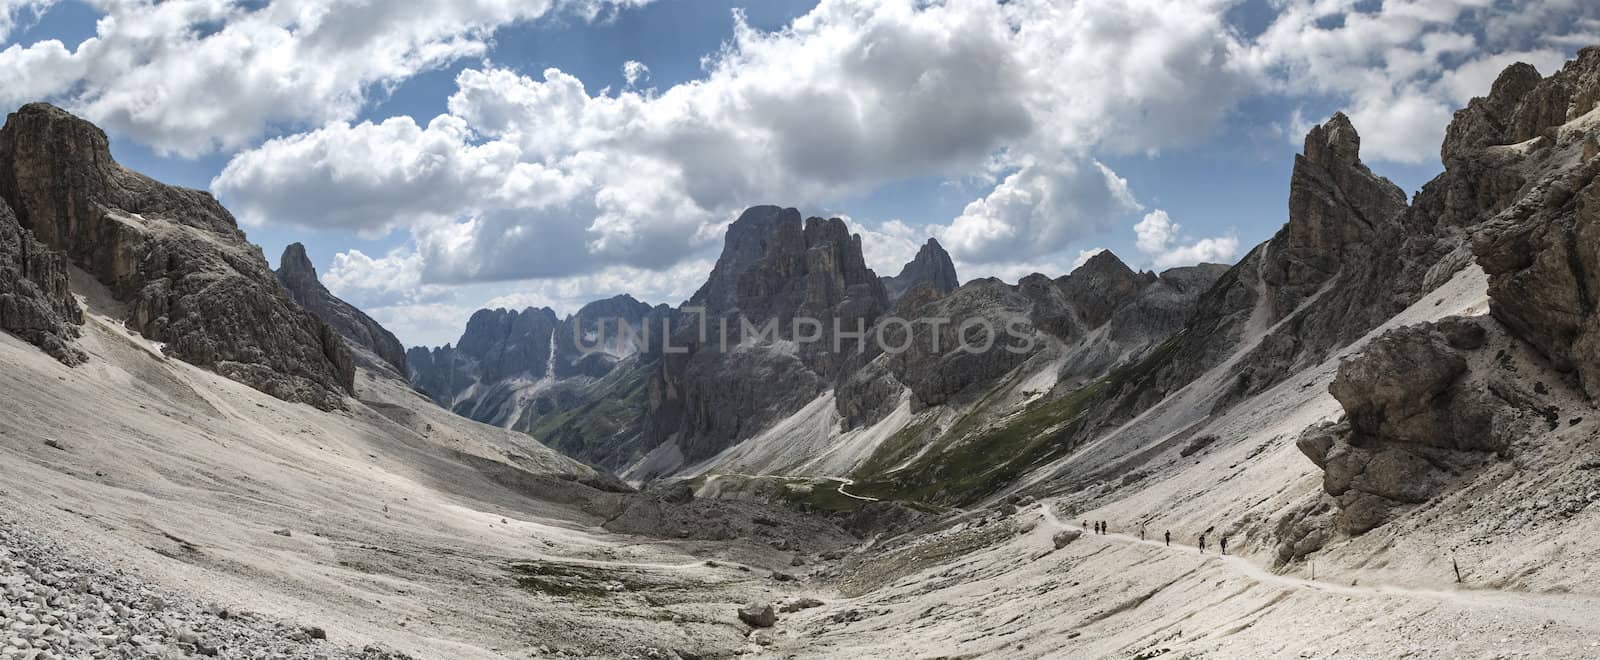 Dolomiti Vajolet Valley panorama by Mdc1970